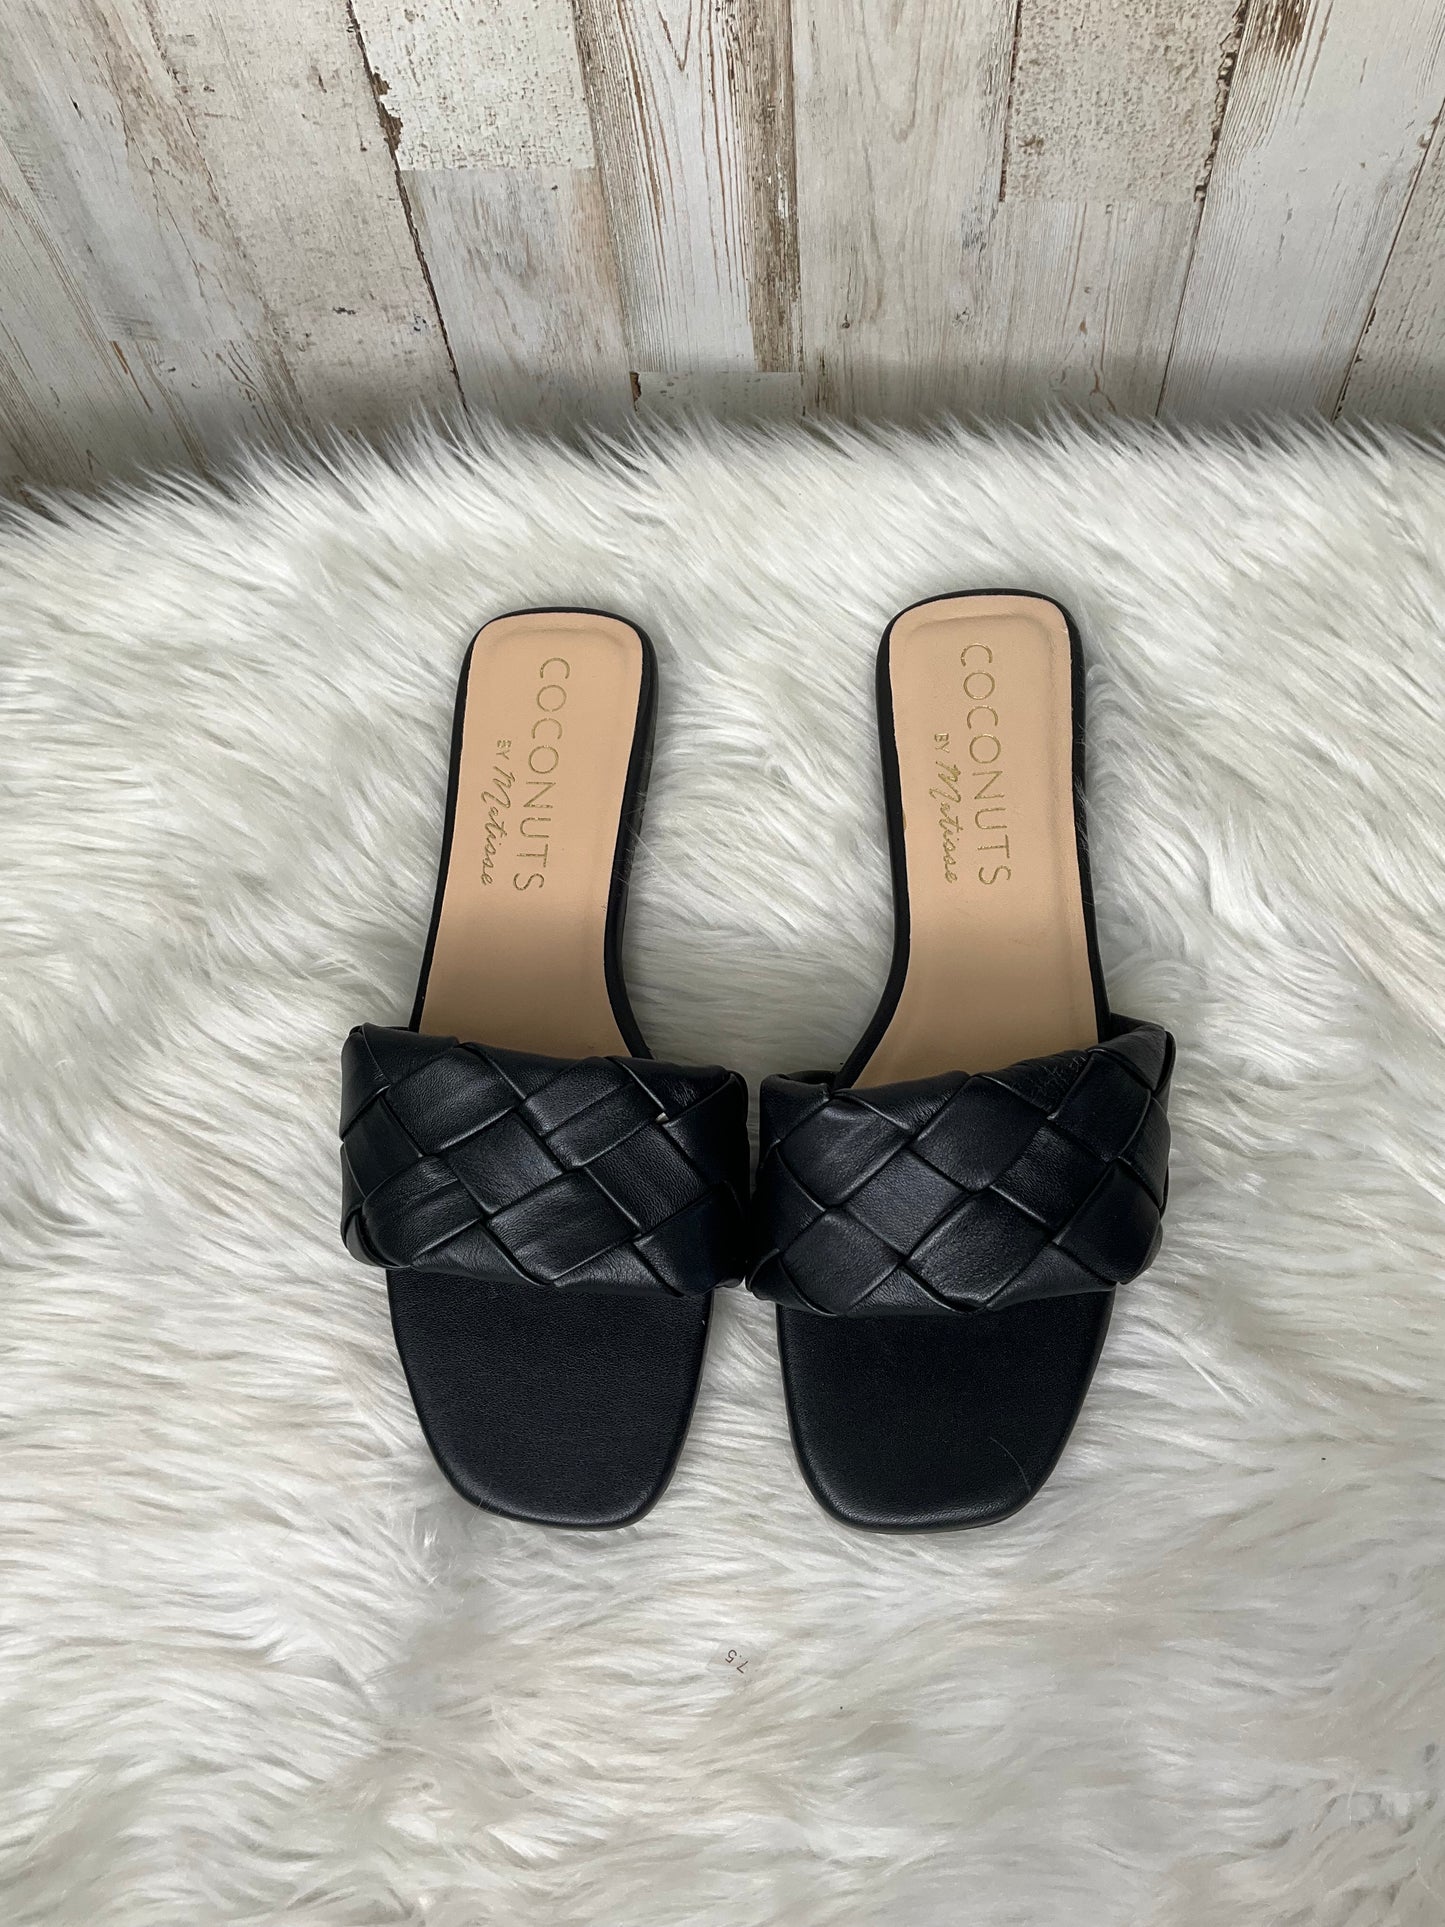 Sandals Flats By Coconuts  Size: 7